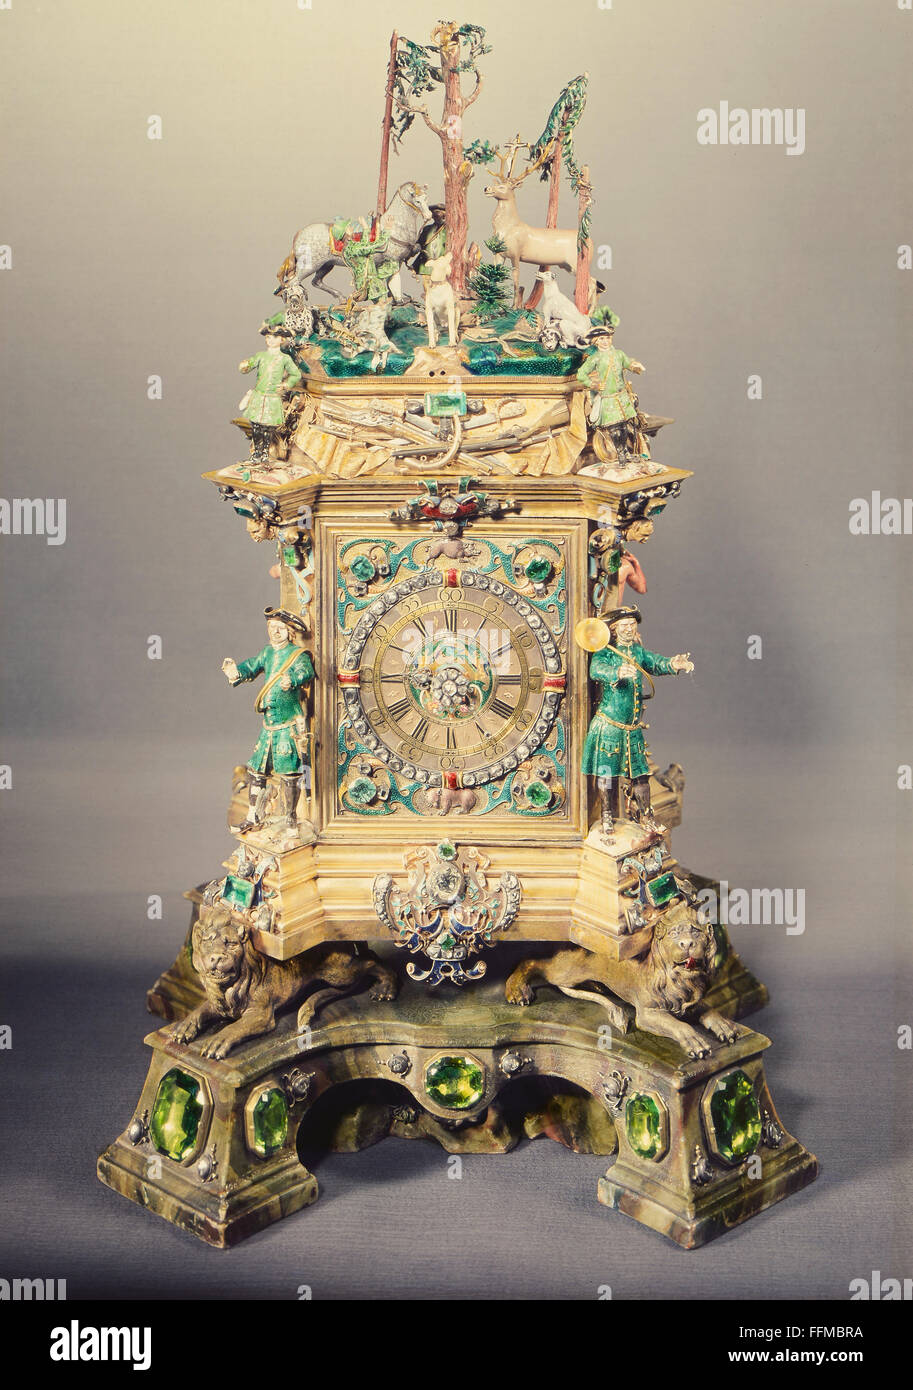 clocks, bracket clock with scene of the legend of Saint Hubertus, gold, silver, gold-plated, gemstone, enamel, varnish, clockwork by Gottlieb Graupner, case by Johann Heinrich Köhler, Dresden, circa 1720, Additional-Rights-Clearences-Not Available Stock Photo